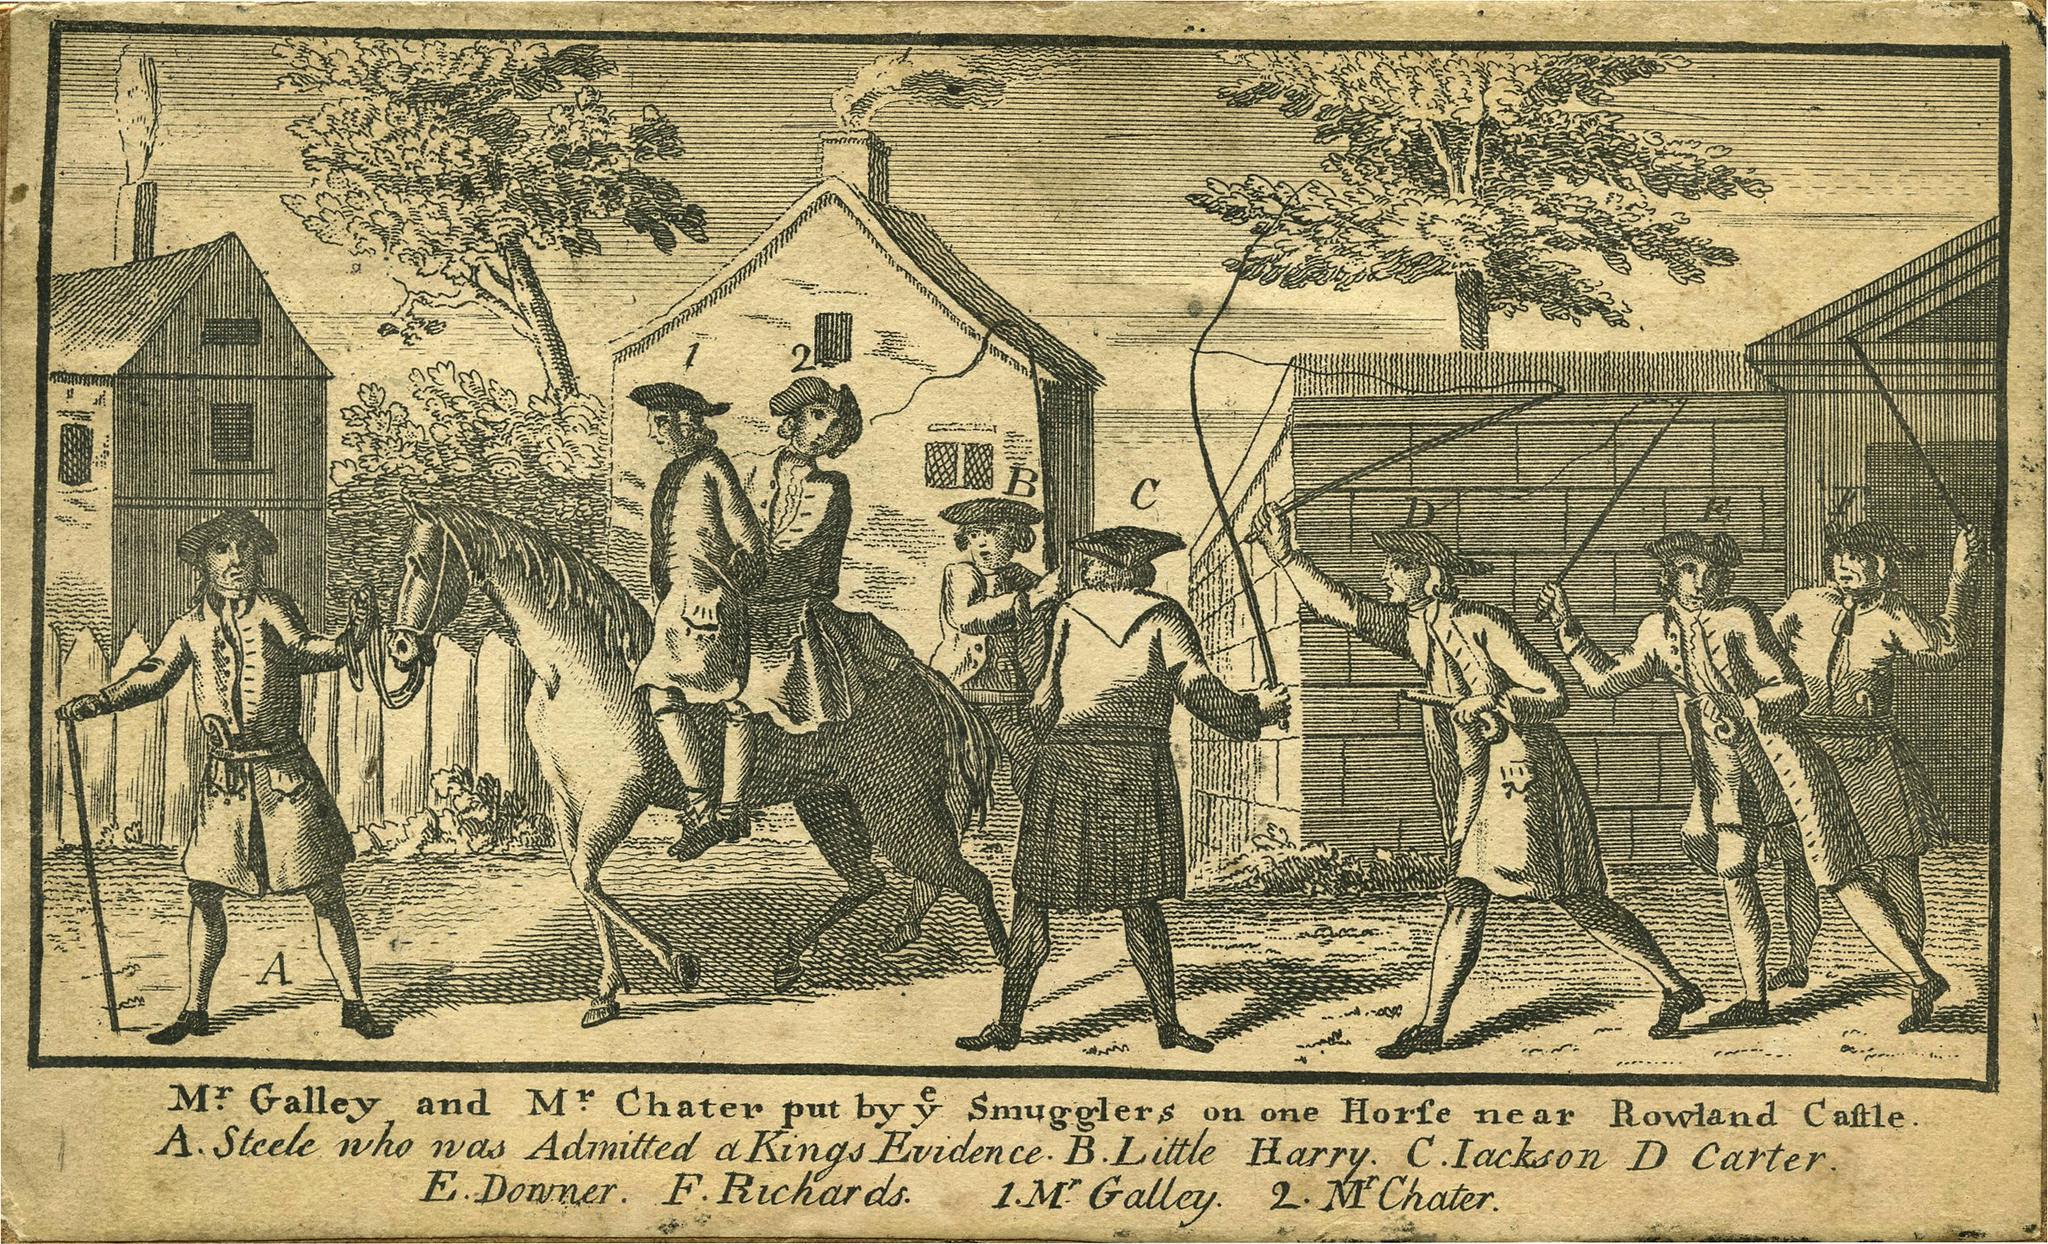 Mr Galley and Mr Chater put by ye Smuggler's on one Horfe near Rowland Castle